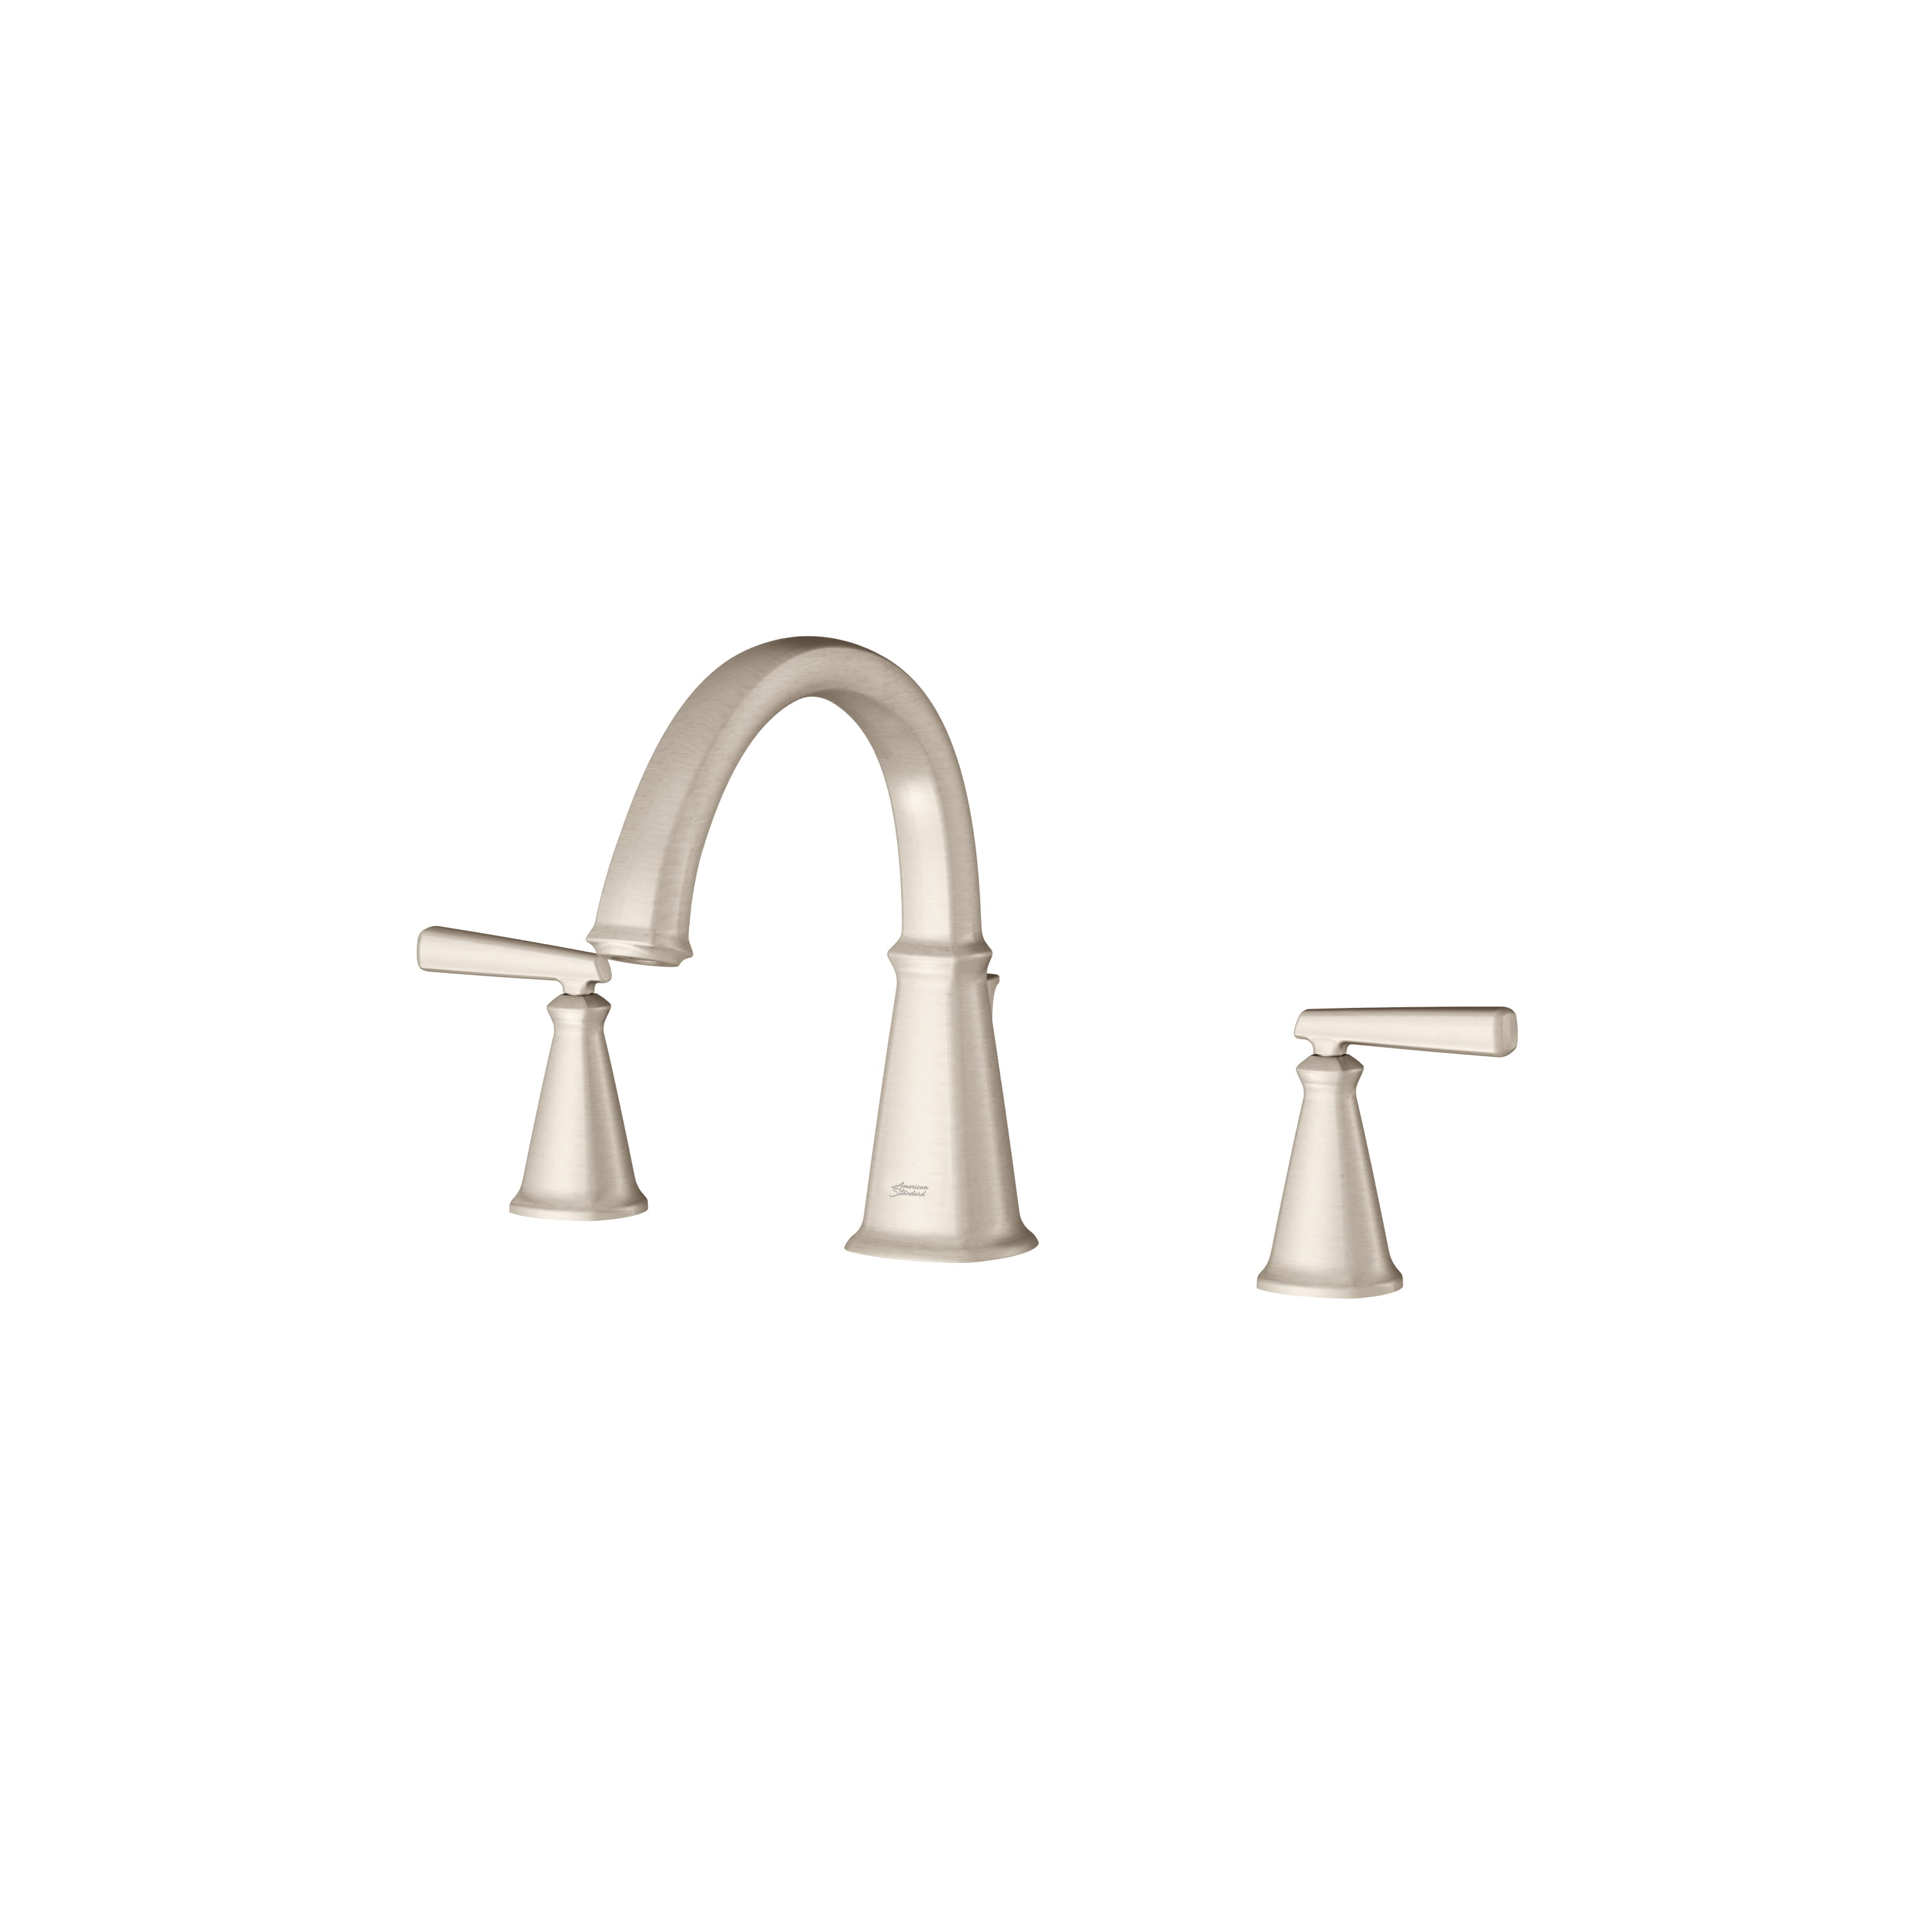 Edgemere Bathtub Faucet With Lever Handles for Flash Rough In Valve   BRUSHED NICKEL